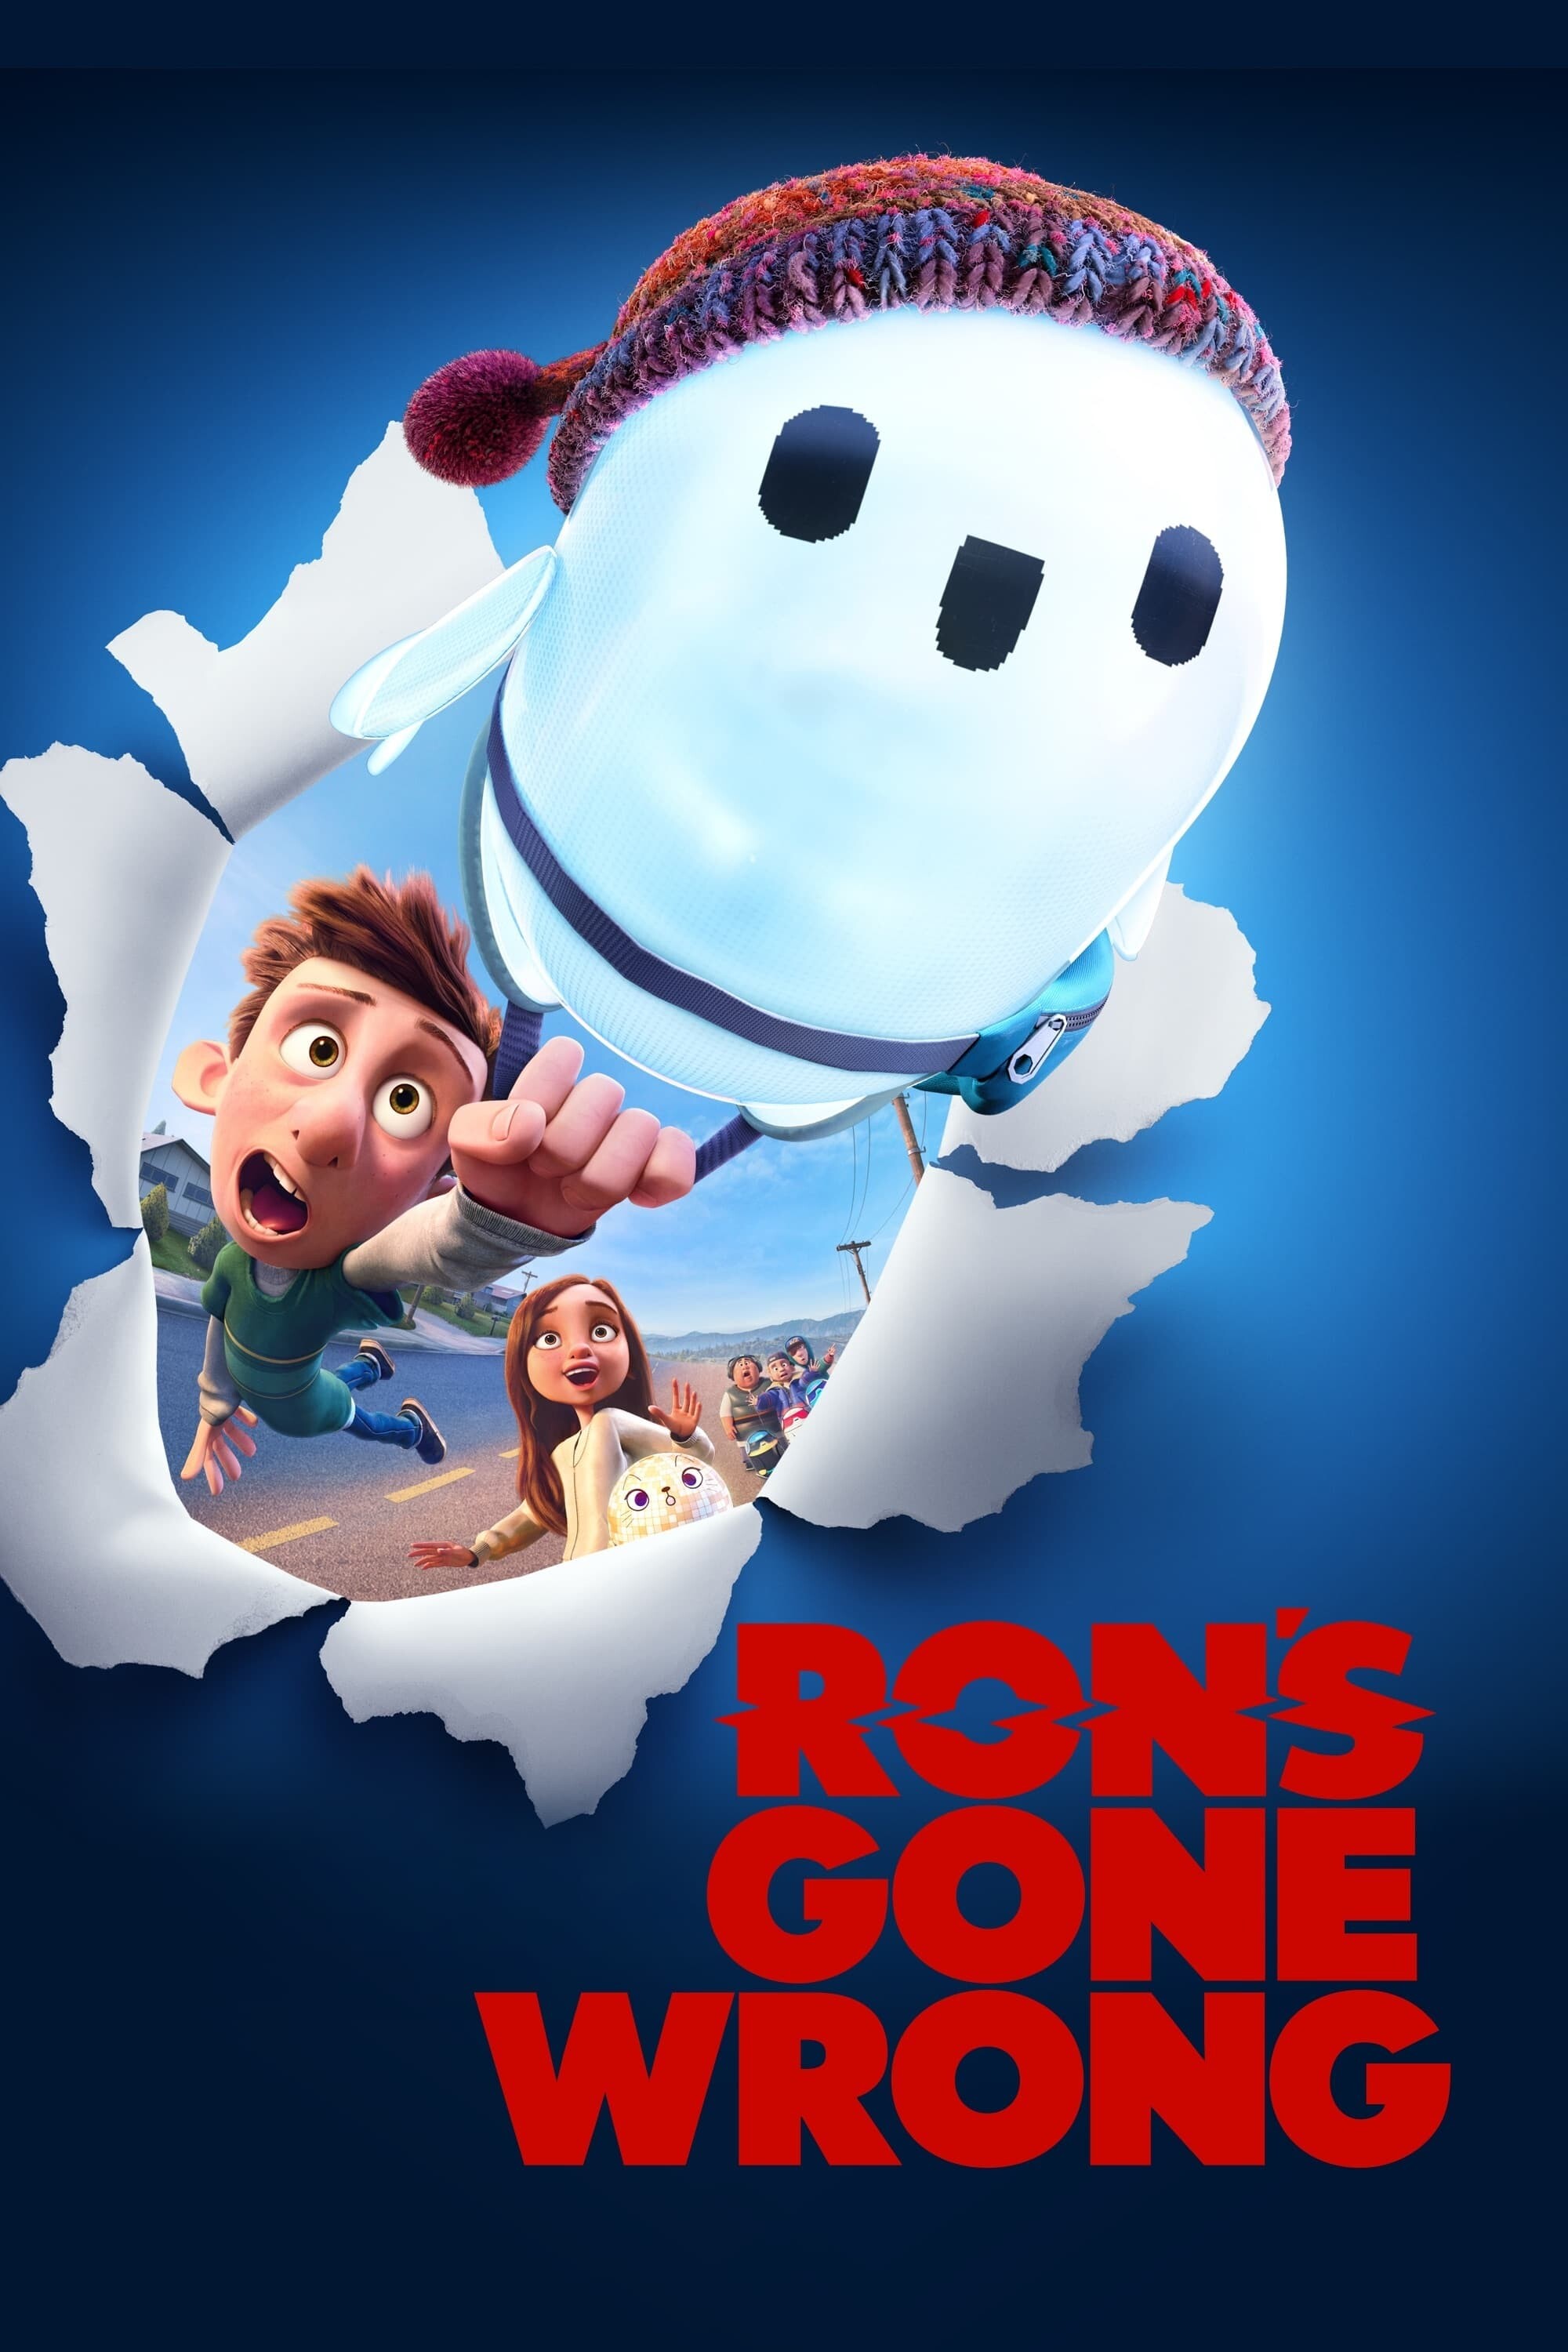 Ron's Gone Wrong: The film features the voice of Jack Dylan Grazer as Barney. 2000x3000 HD Wallpaper.